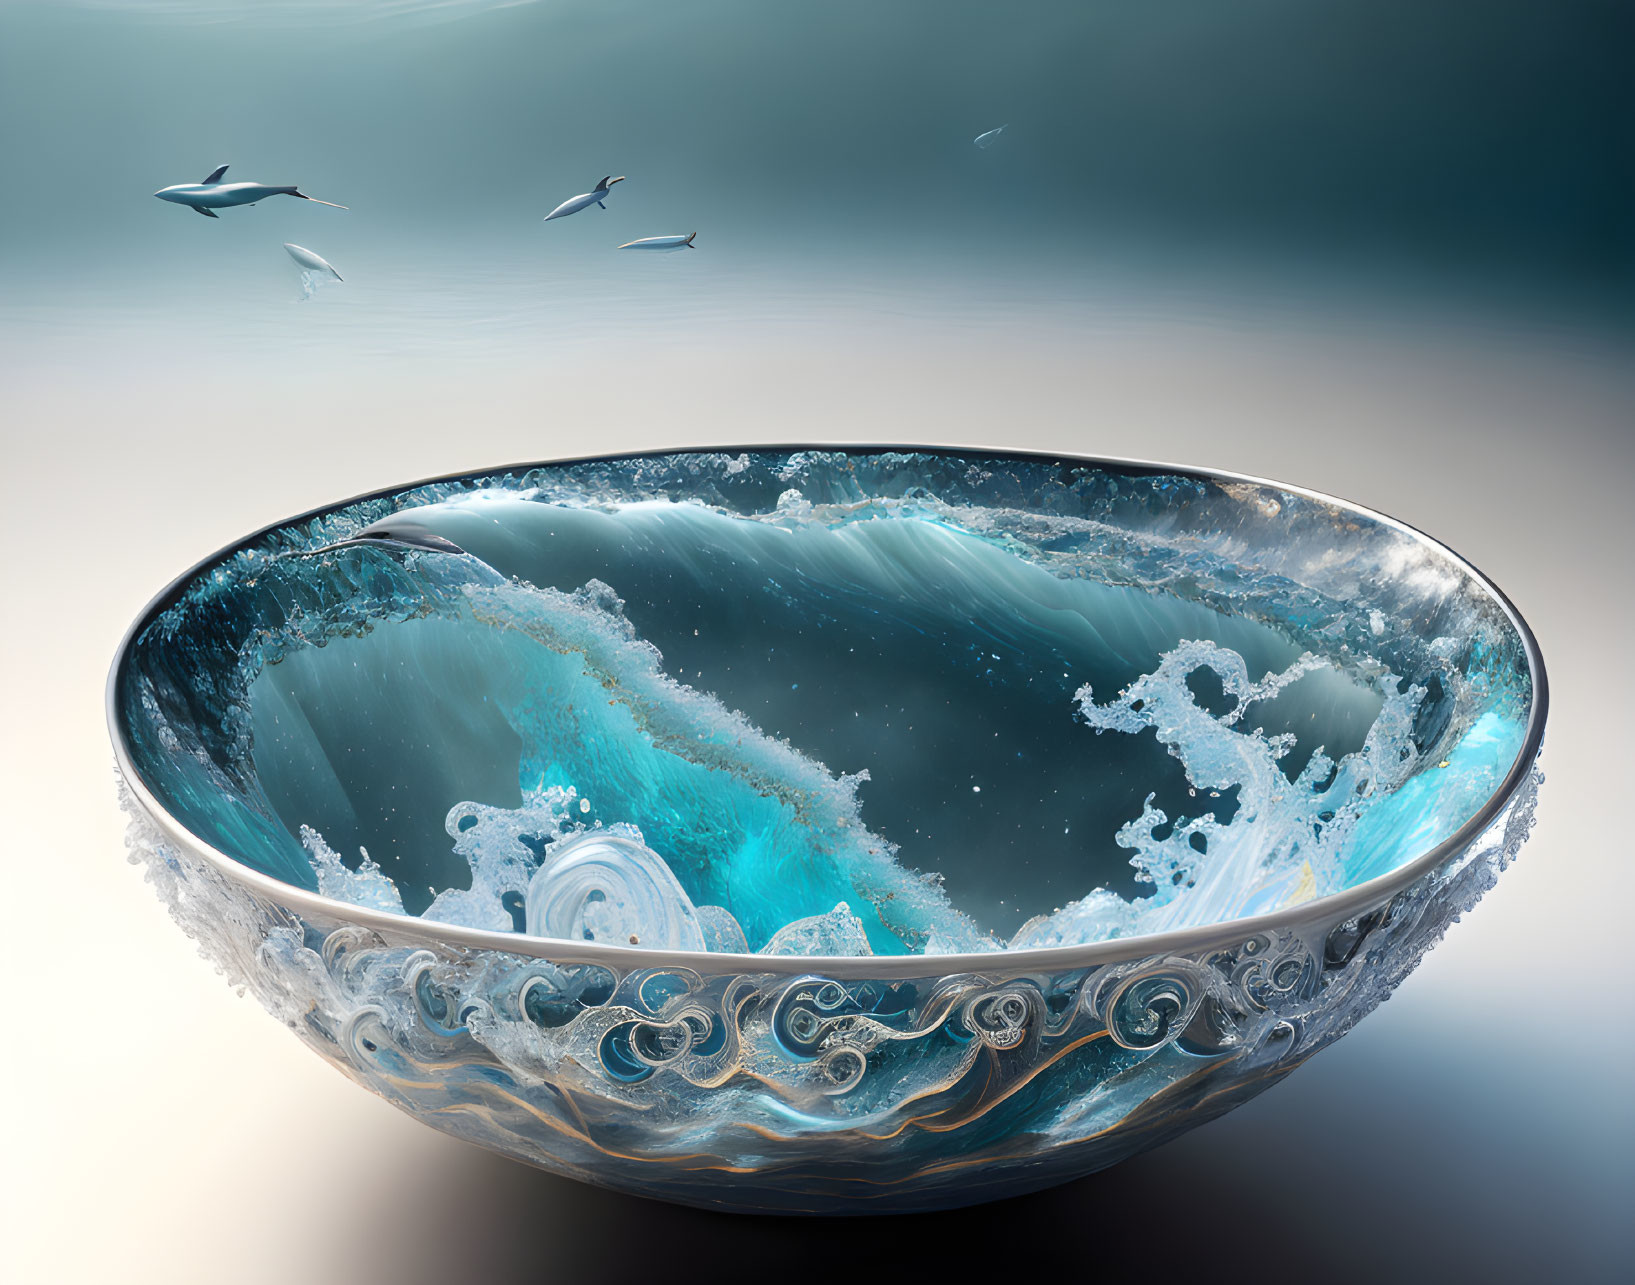 Surreal ocean scene in a bowl with crashing waves and flying birds